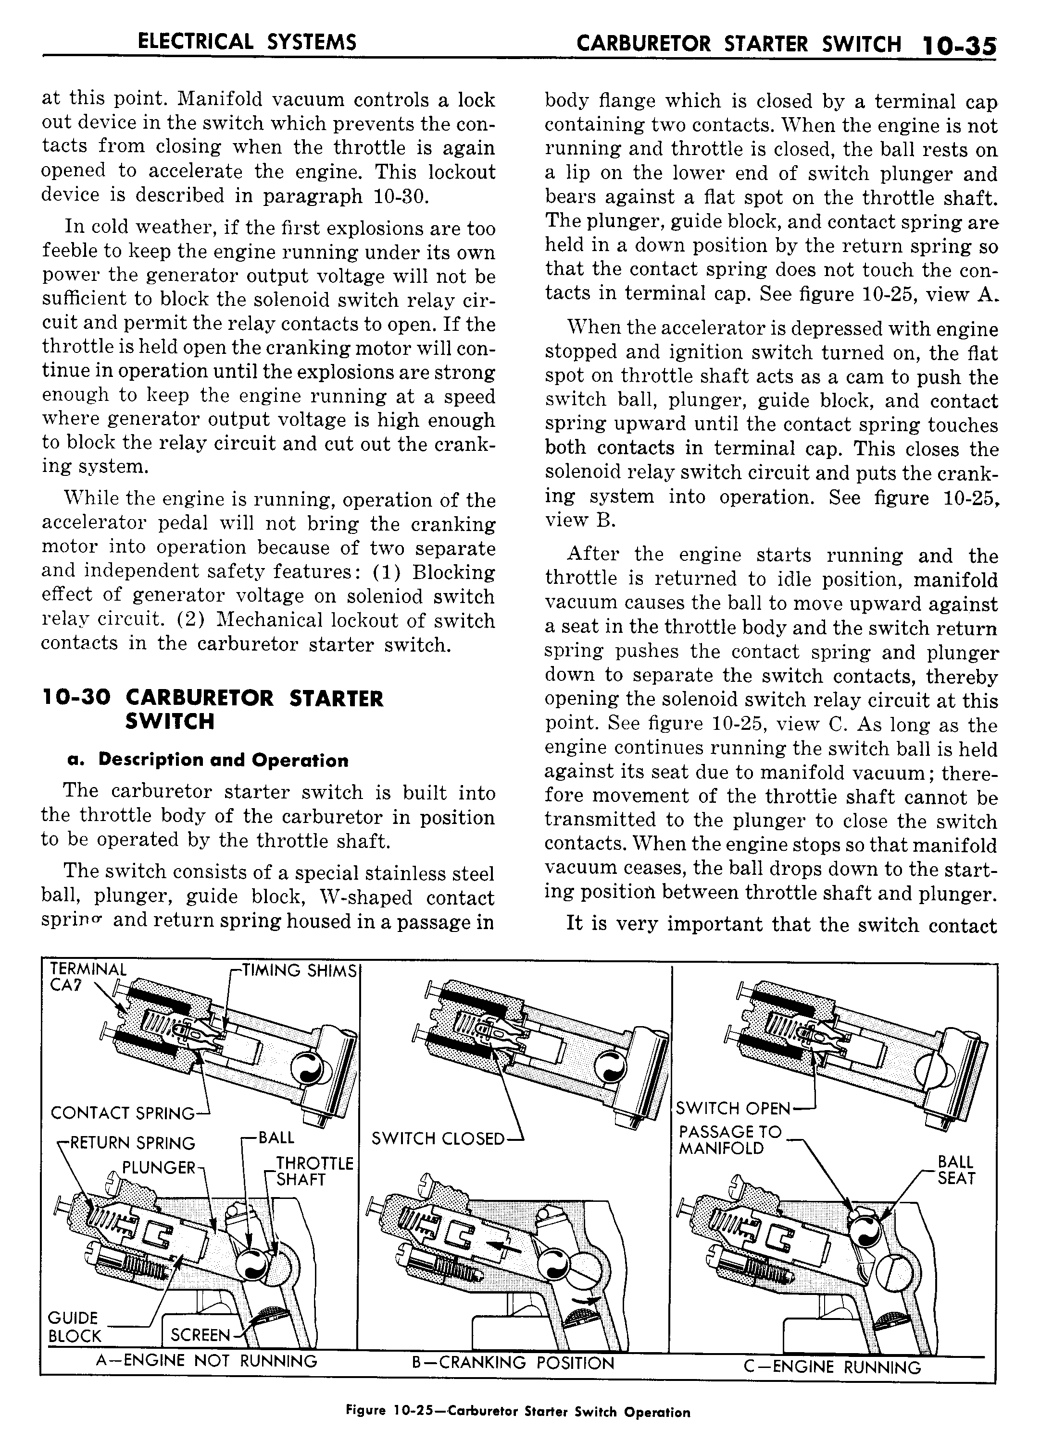 n_11 1957 Buick Shop Manual - Electrical Systems-035-035.jpg